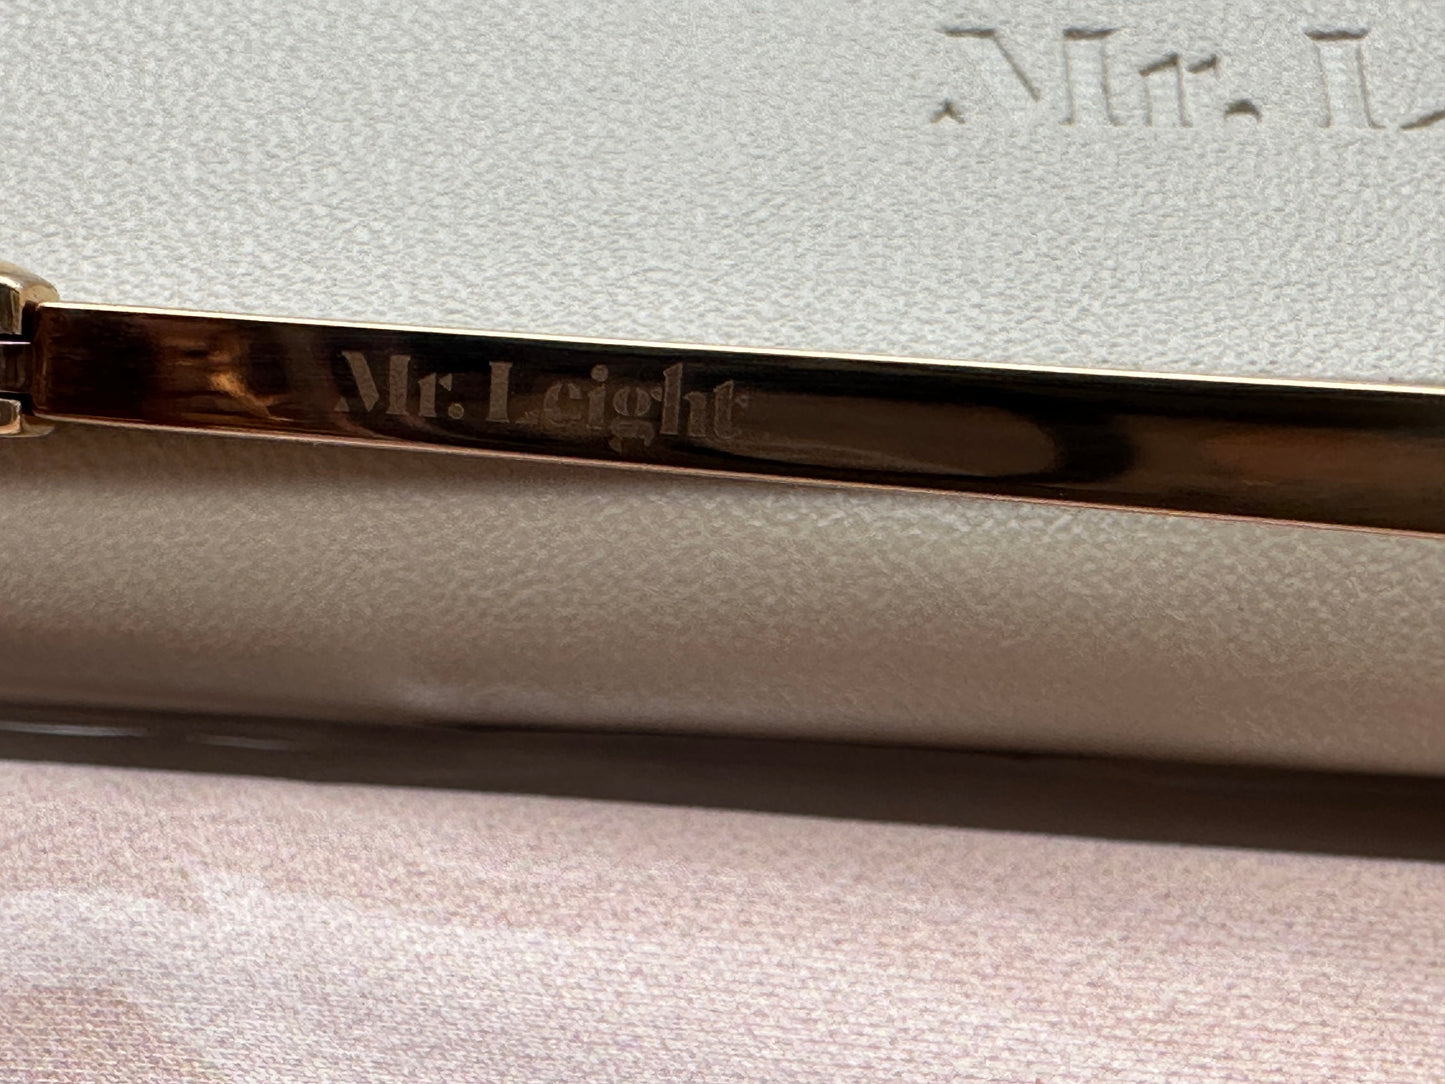 Mr Leight Doheny SL 18K Rose Gold Rosewood Sunset Retail $795